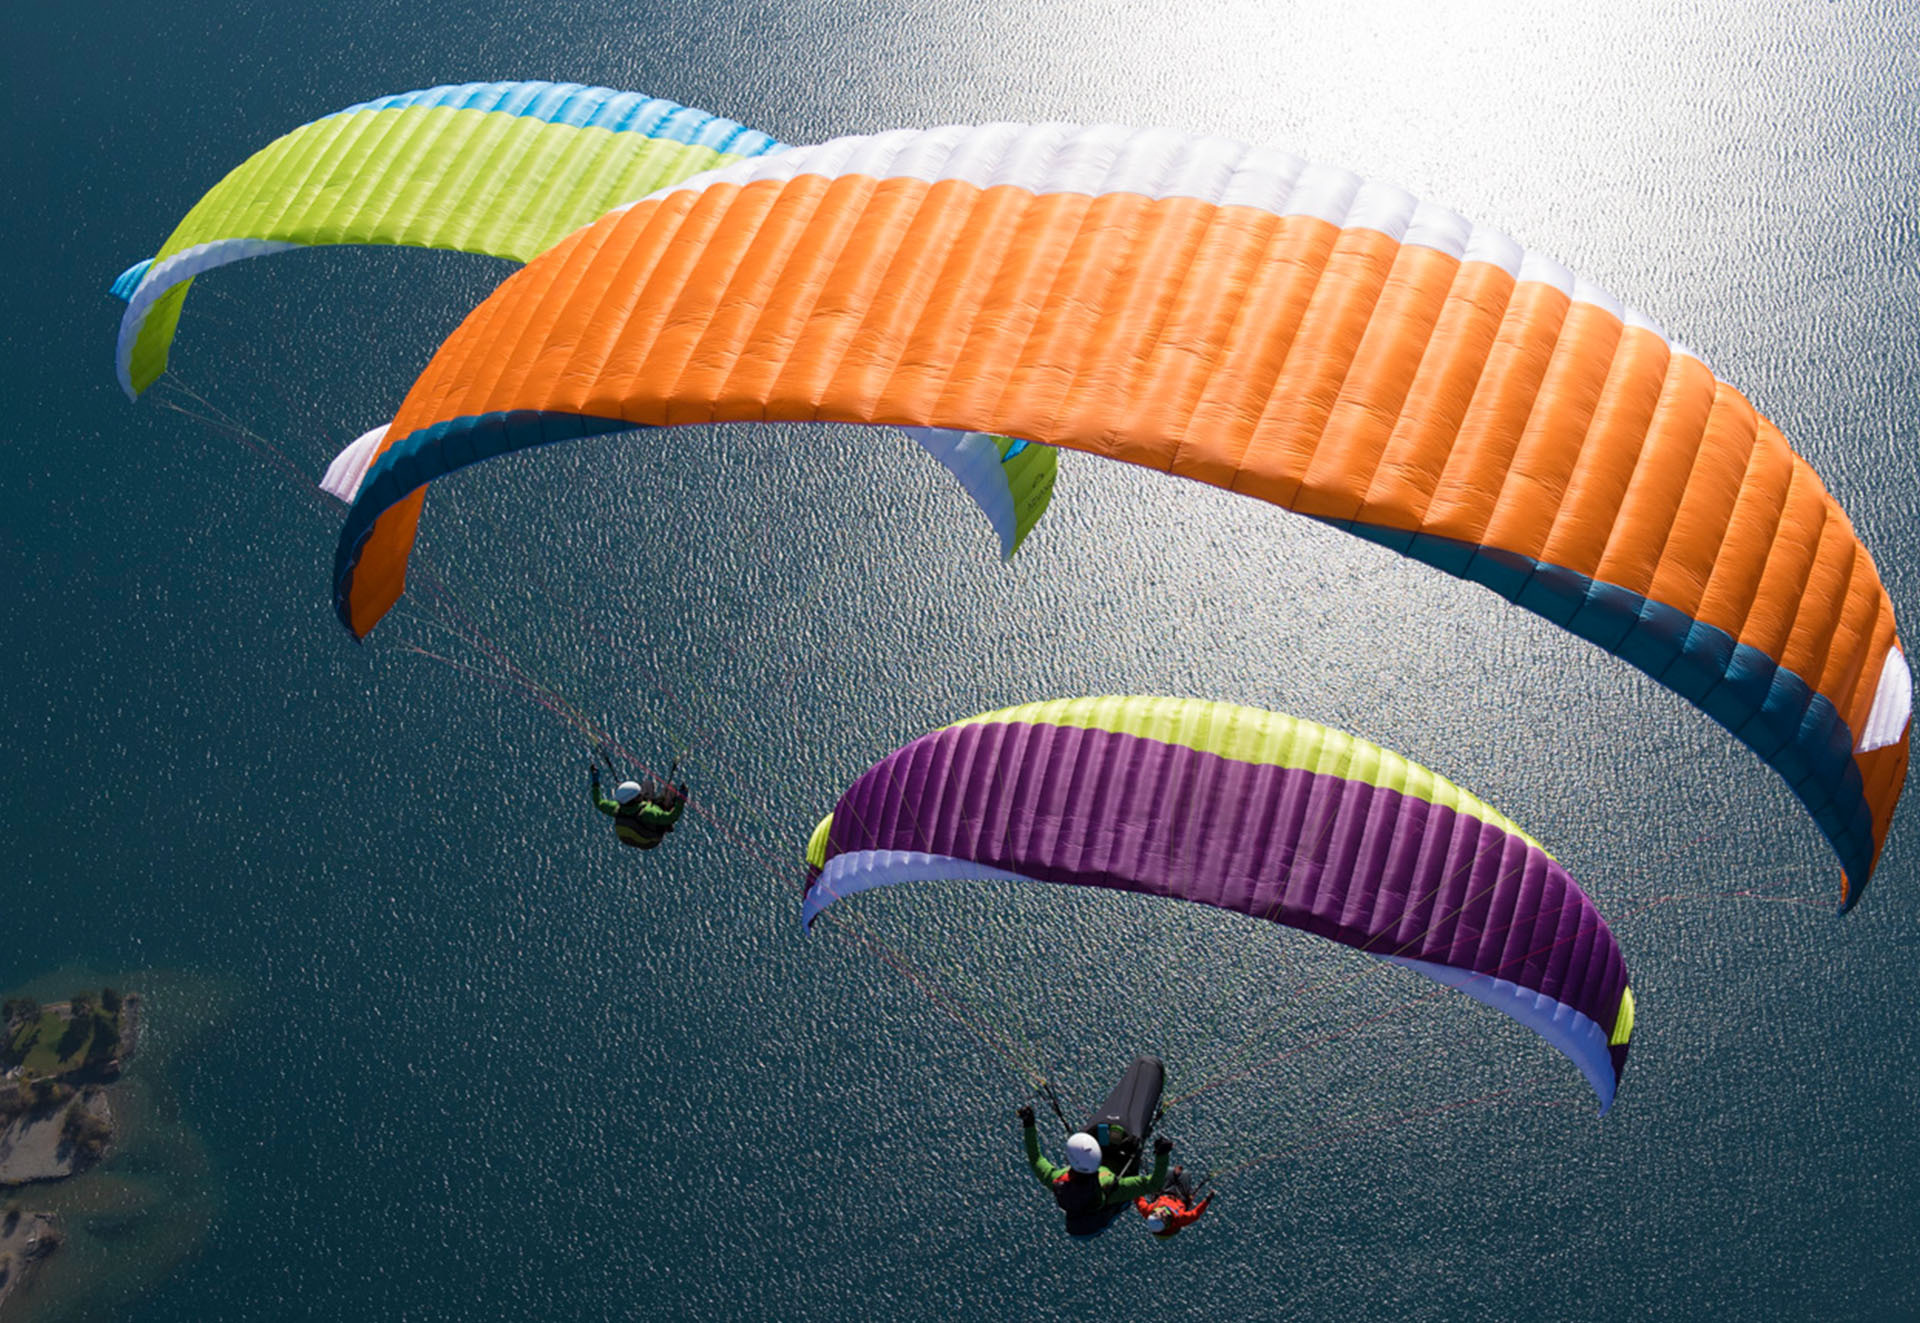 Paragliding: Recreational and competitive adventure sport, Free-flying. 1920x1330 HD Wallpaper.